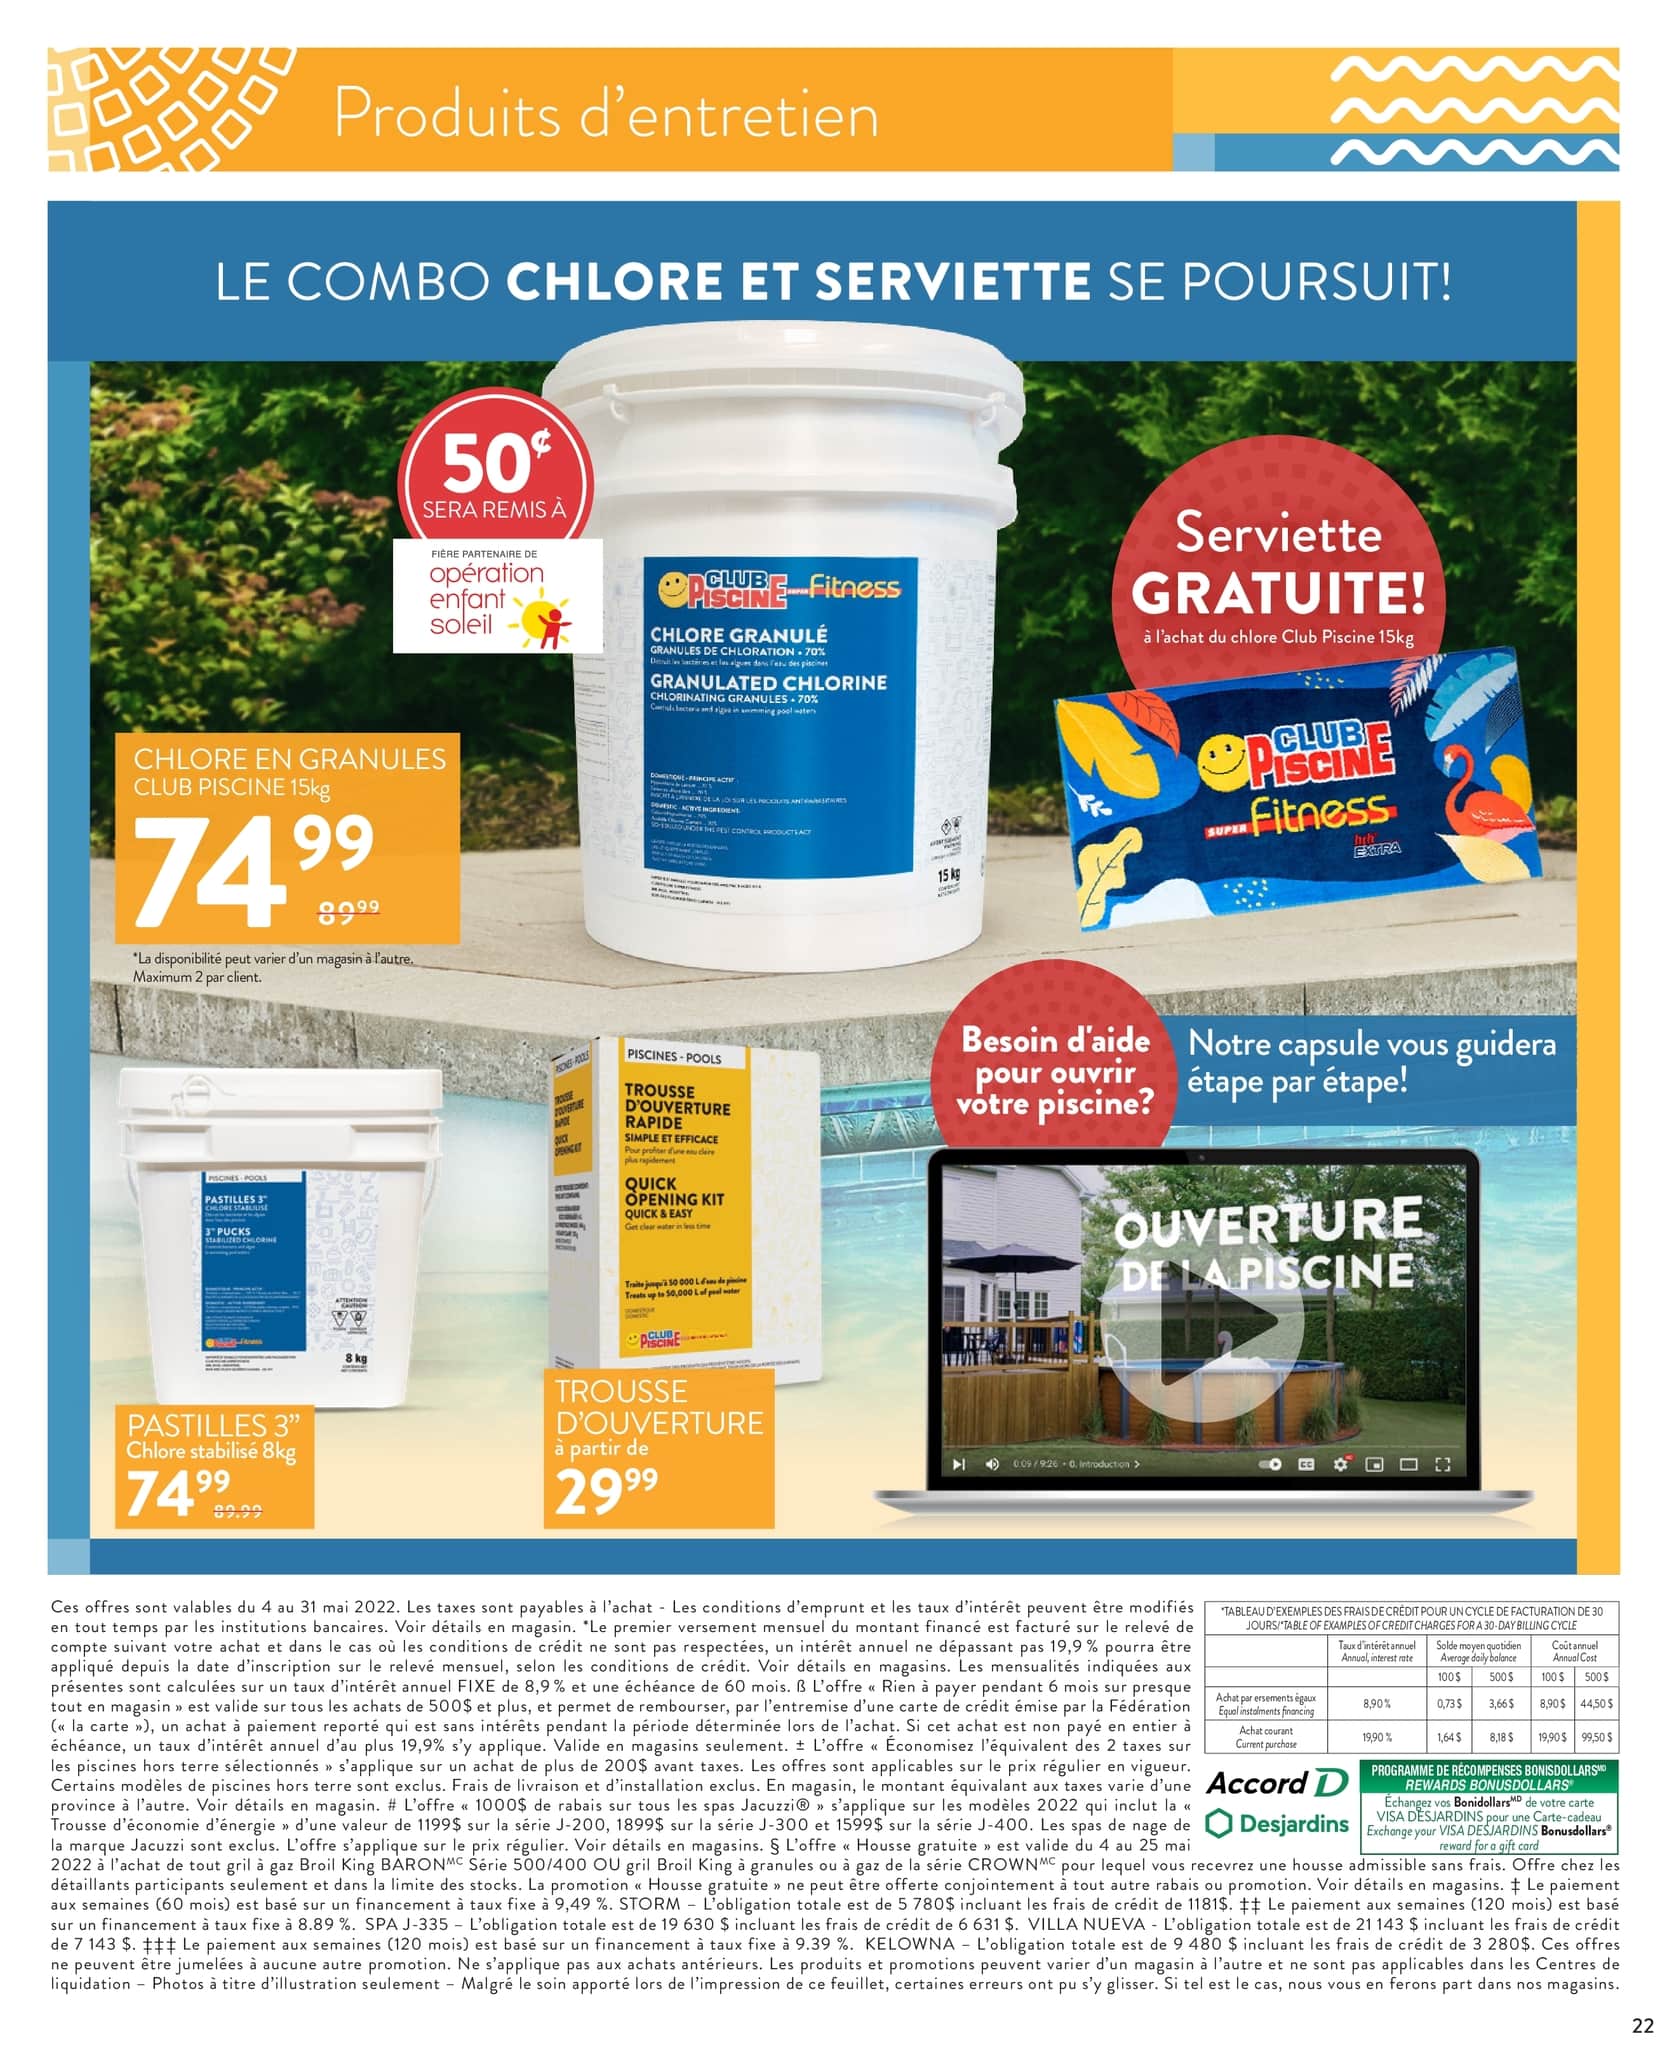 Circulaire Club Piscine Super Fitness - Page 22